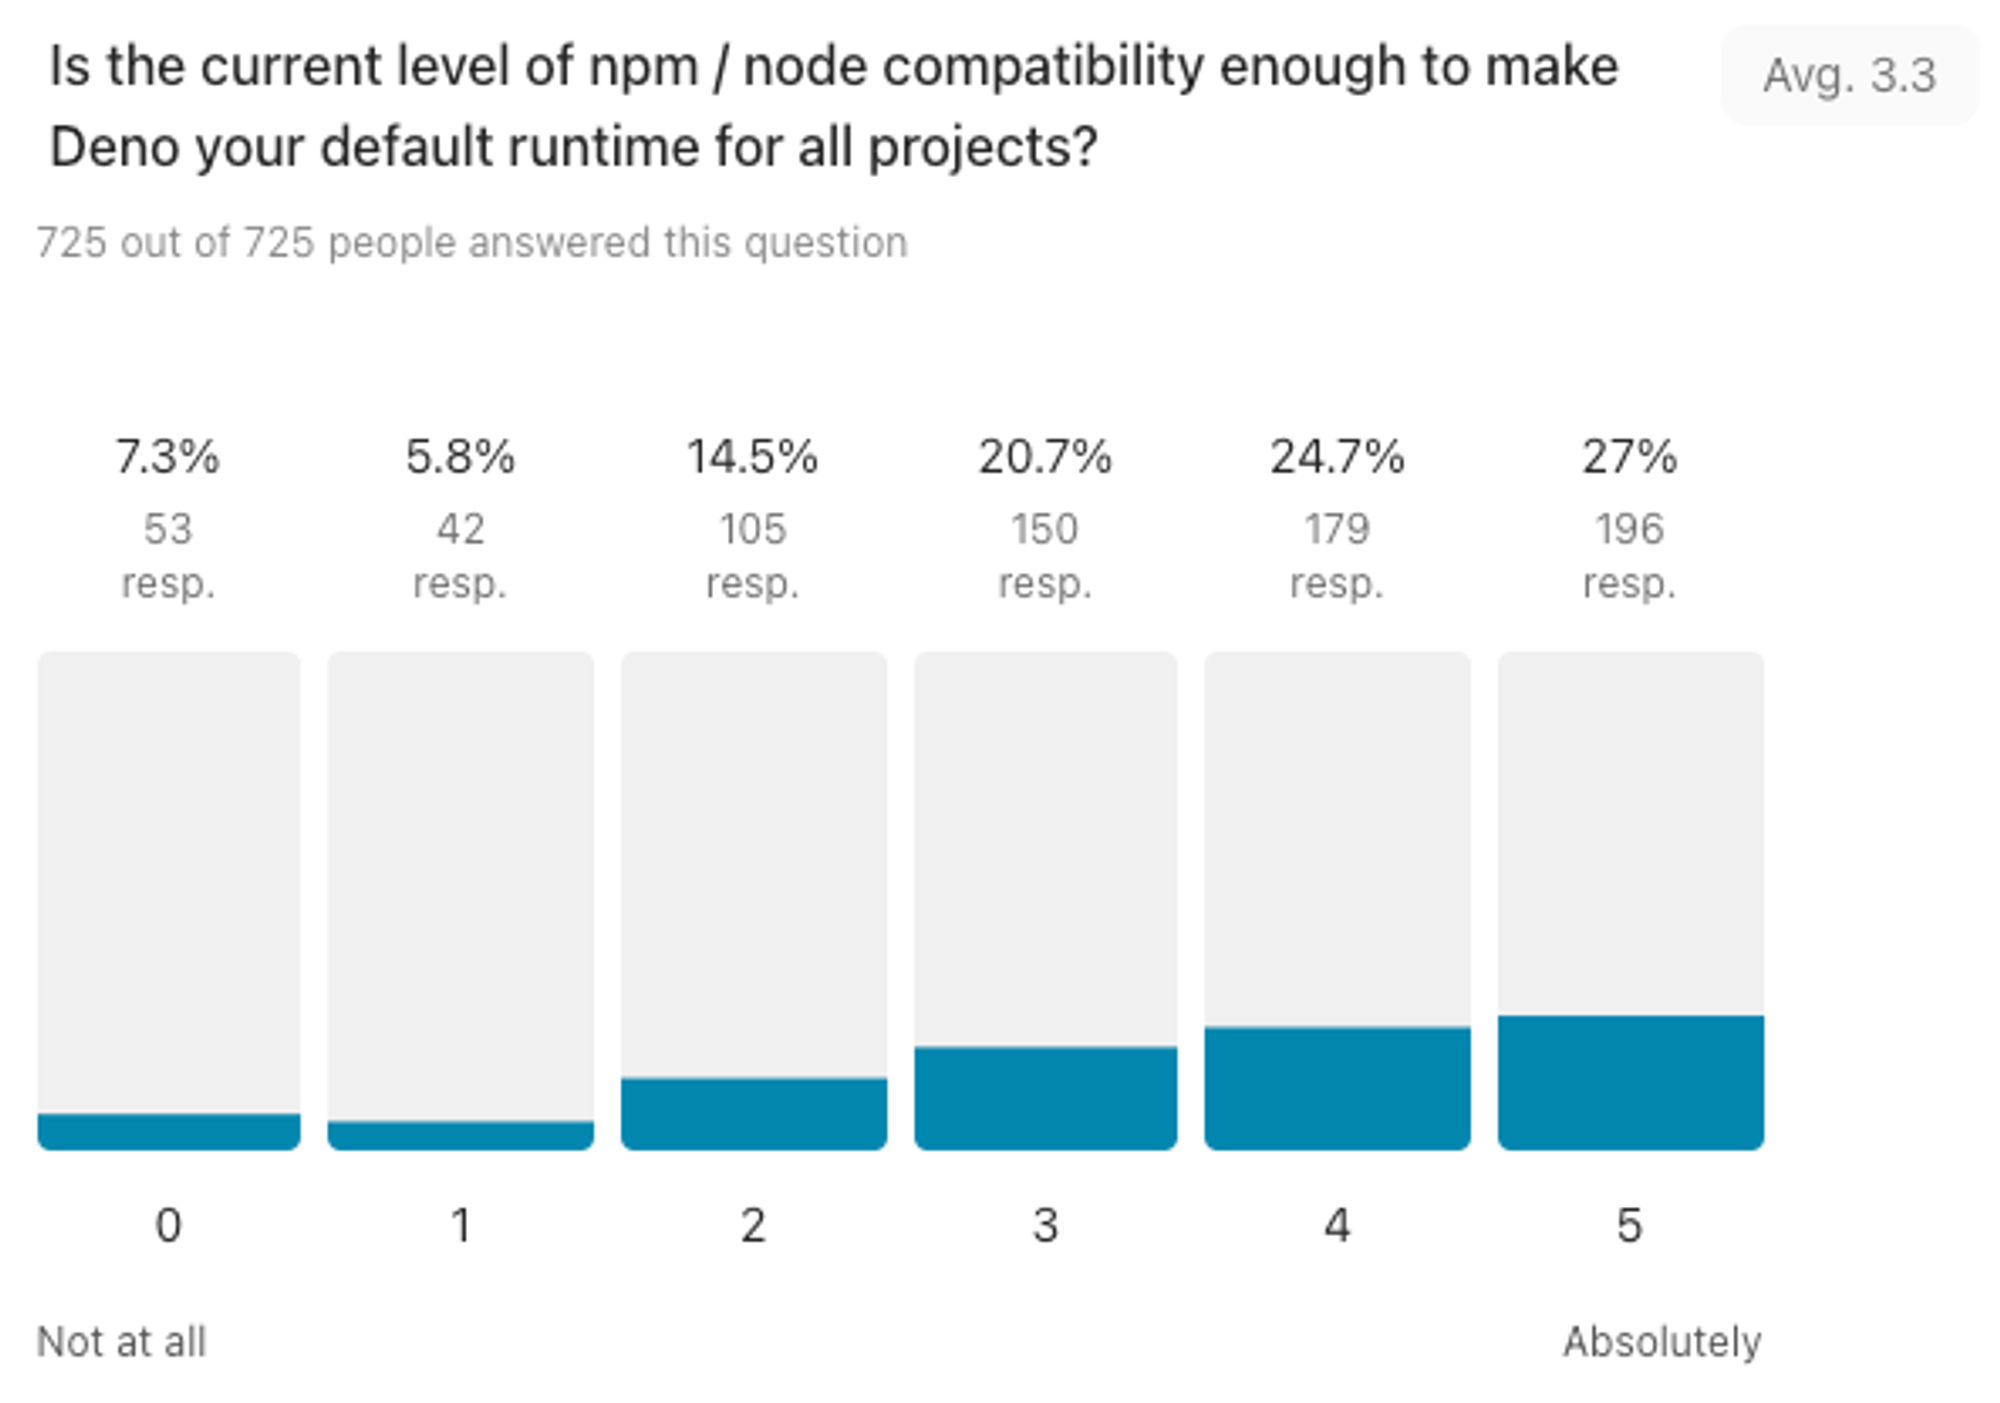 The current level of npm and Node compatibility enough to make Deno the default runtime.